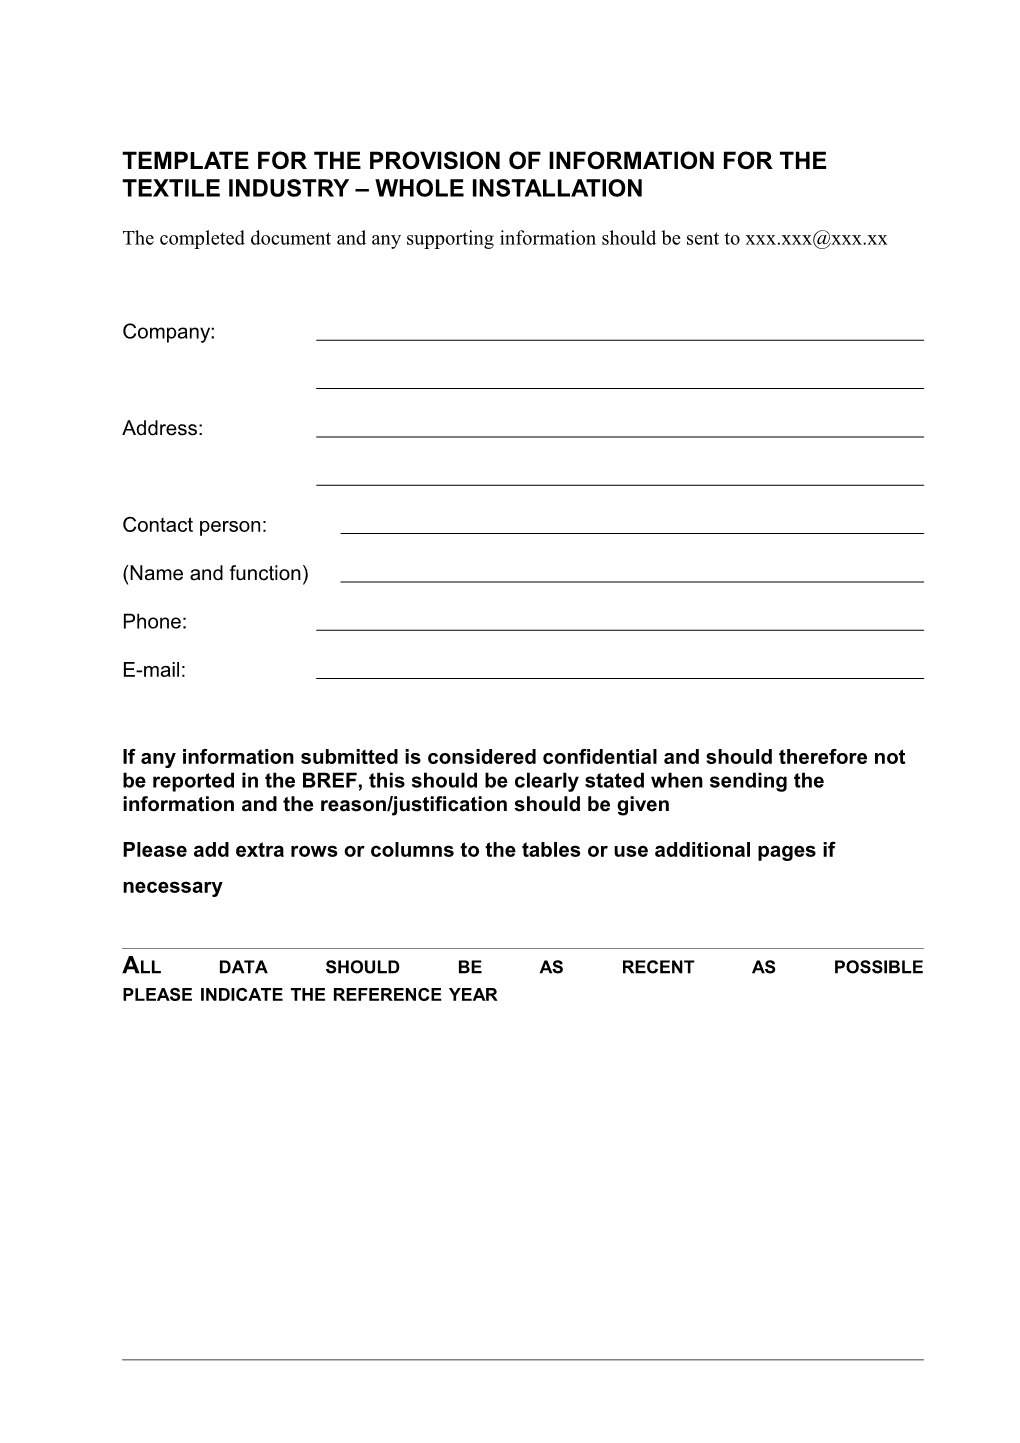 Template for the Provision of Information for the Textile Industry Whole Installation